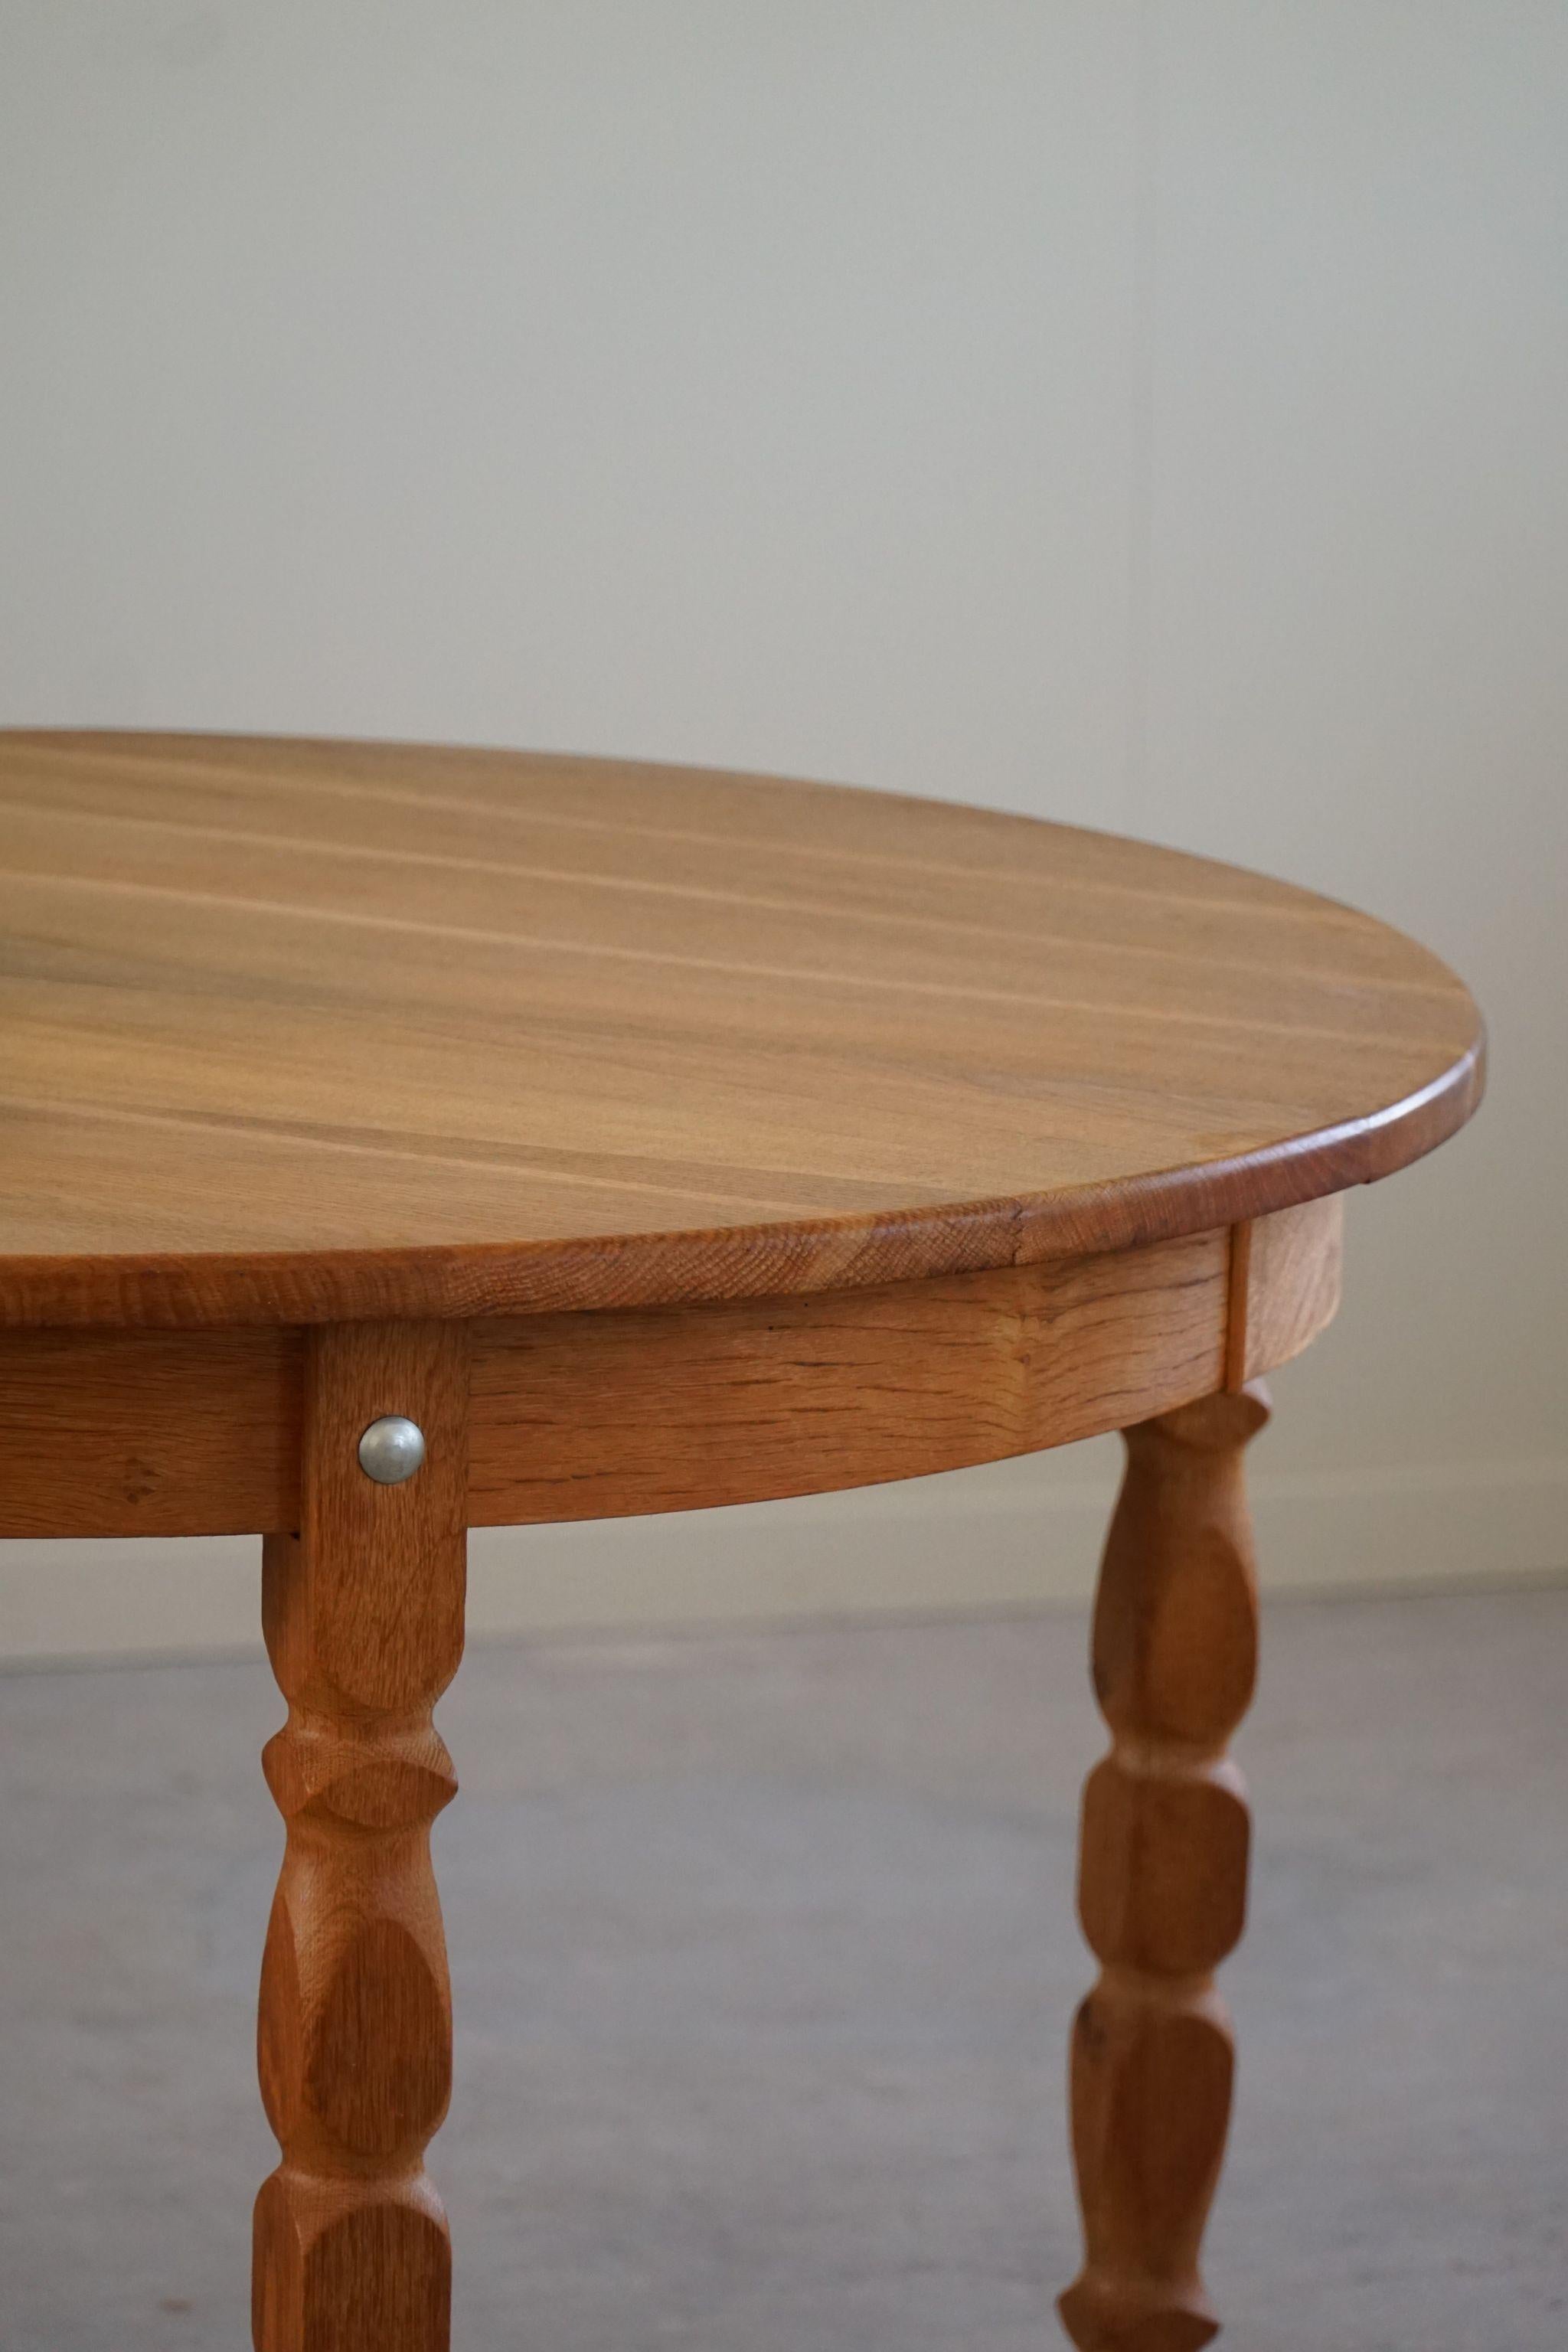 Mid-Century Danish Round Dining Table in Solid Oak with Two Extensions, 1960s For Sale 5